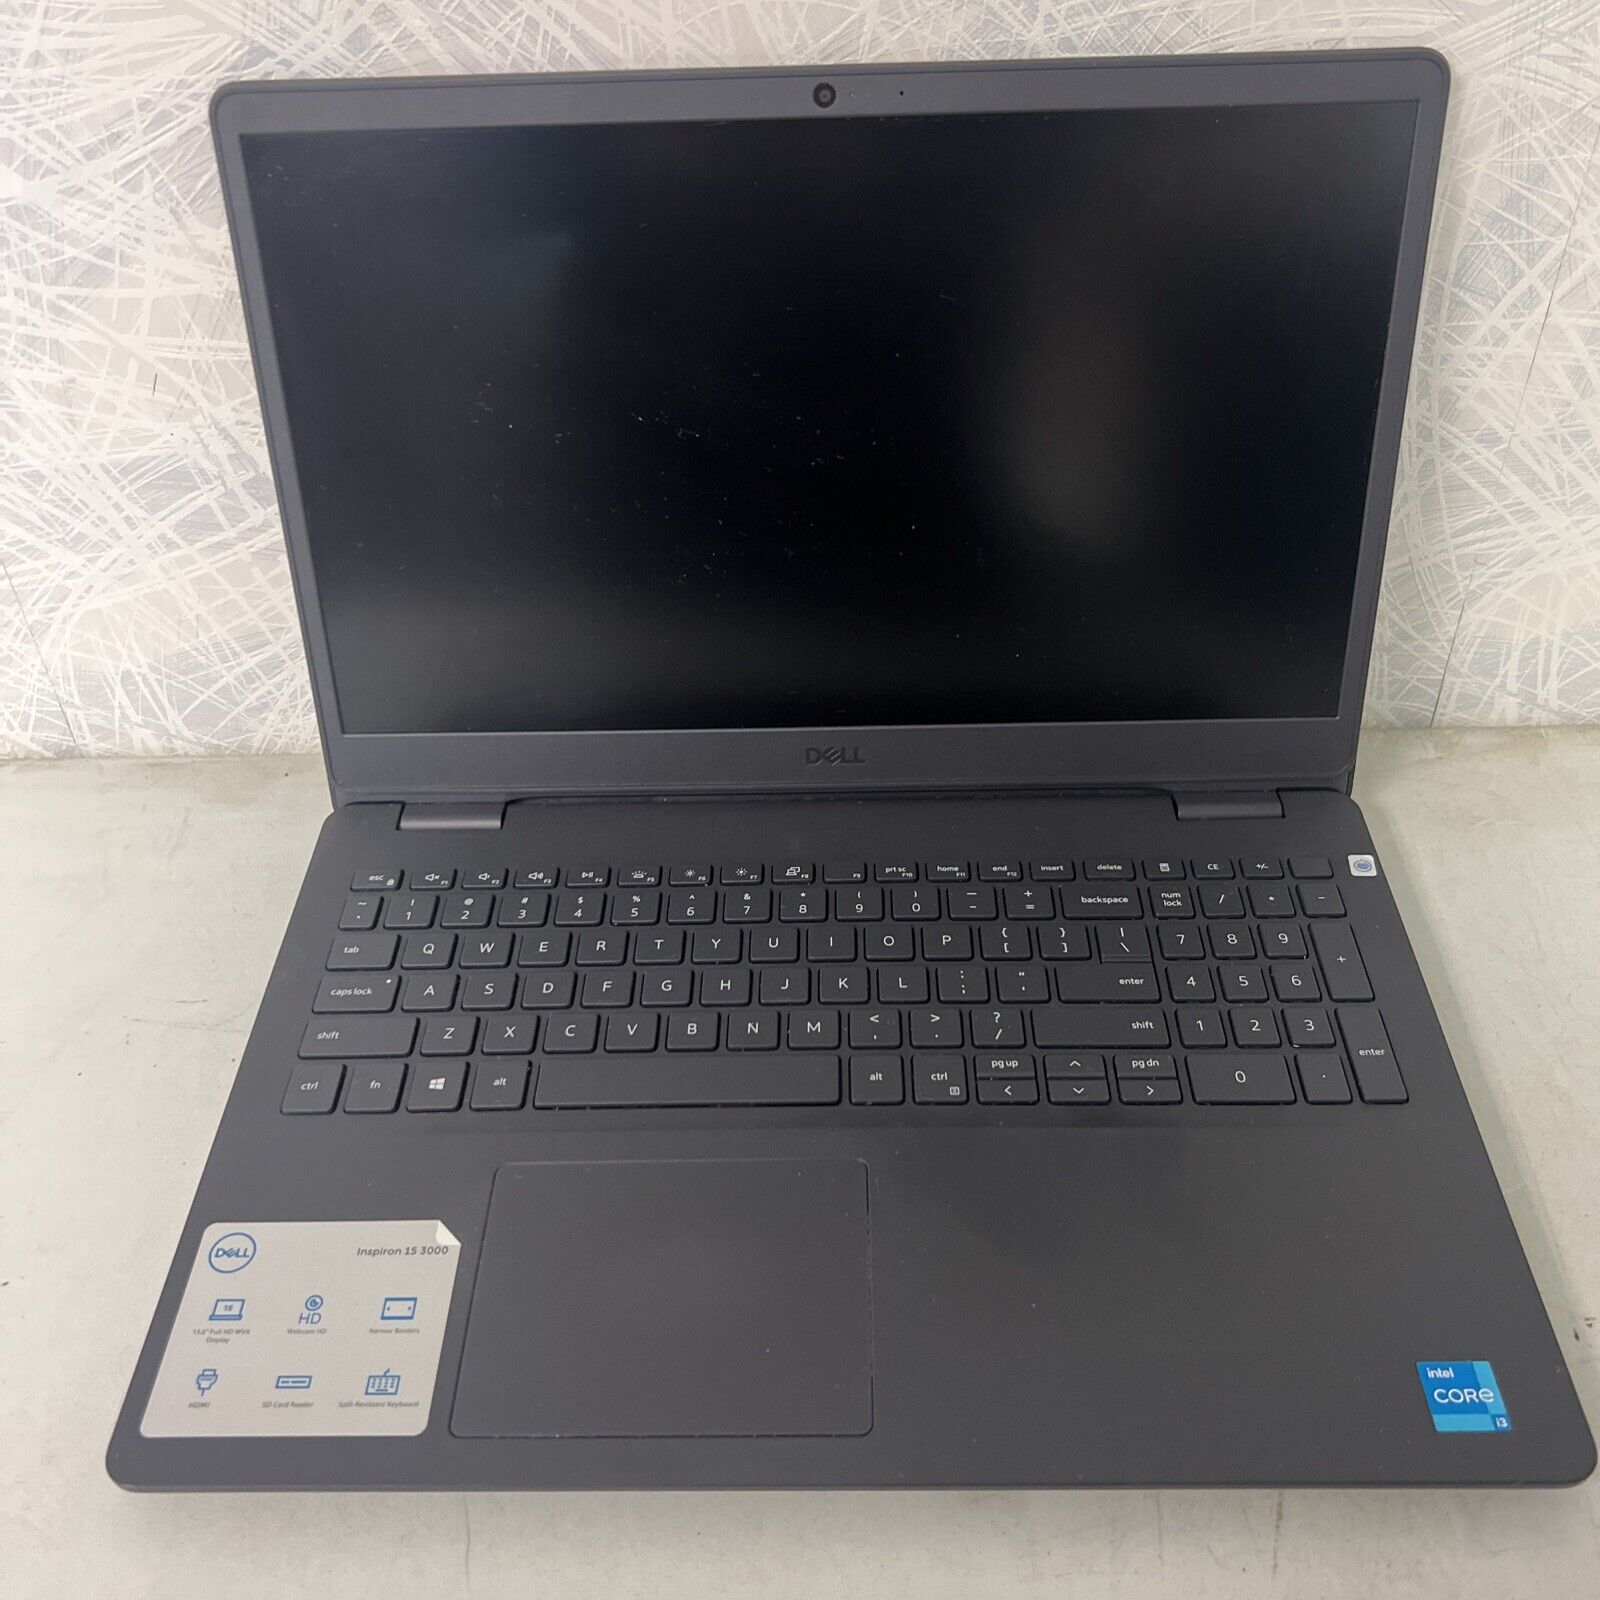 Dell Inspiron 15 3501 Laptop - i3-1115G4 - 8GB RAM - NO HDD - OVERHEATS - PARTS